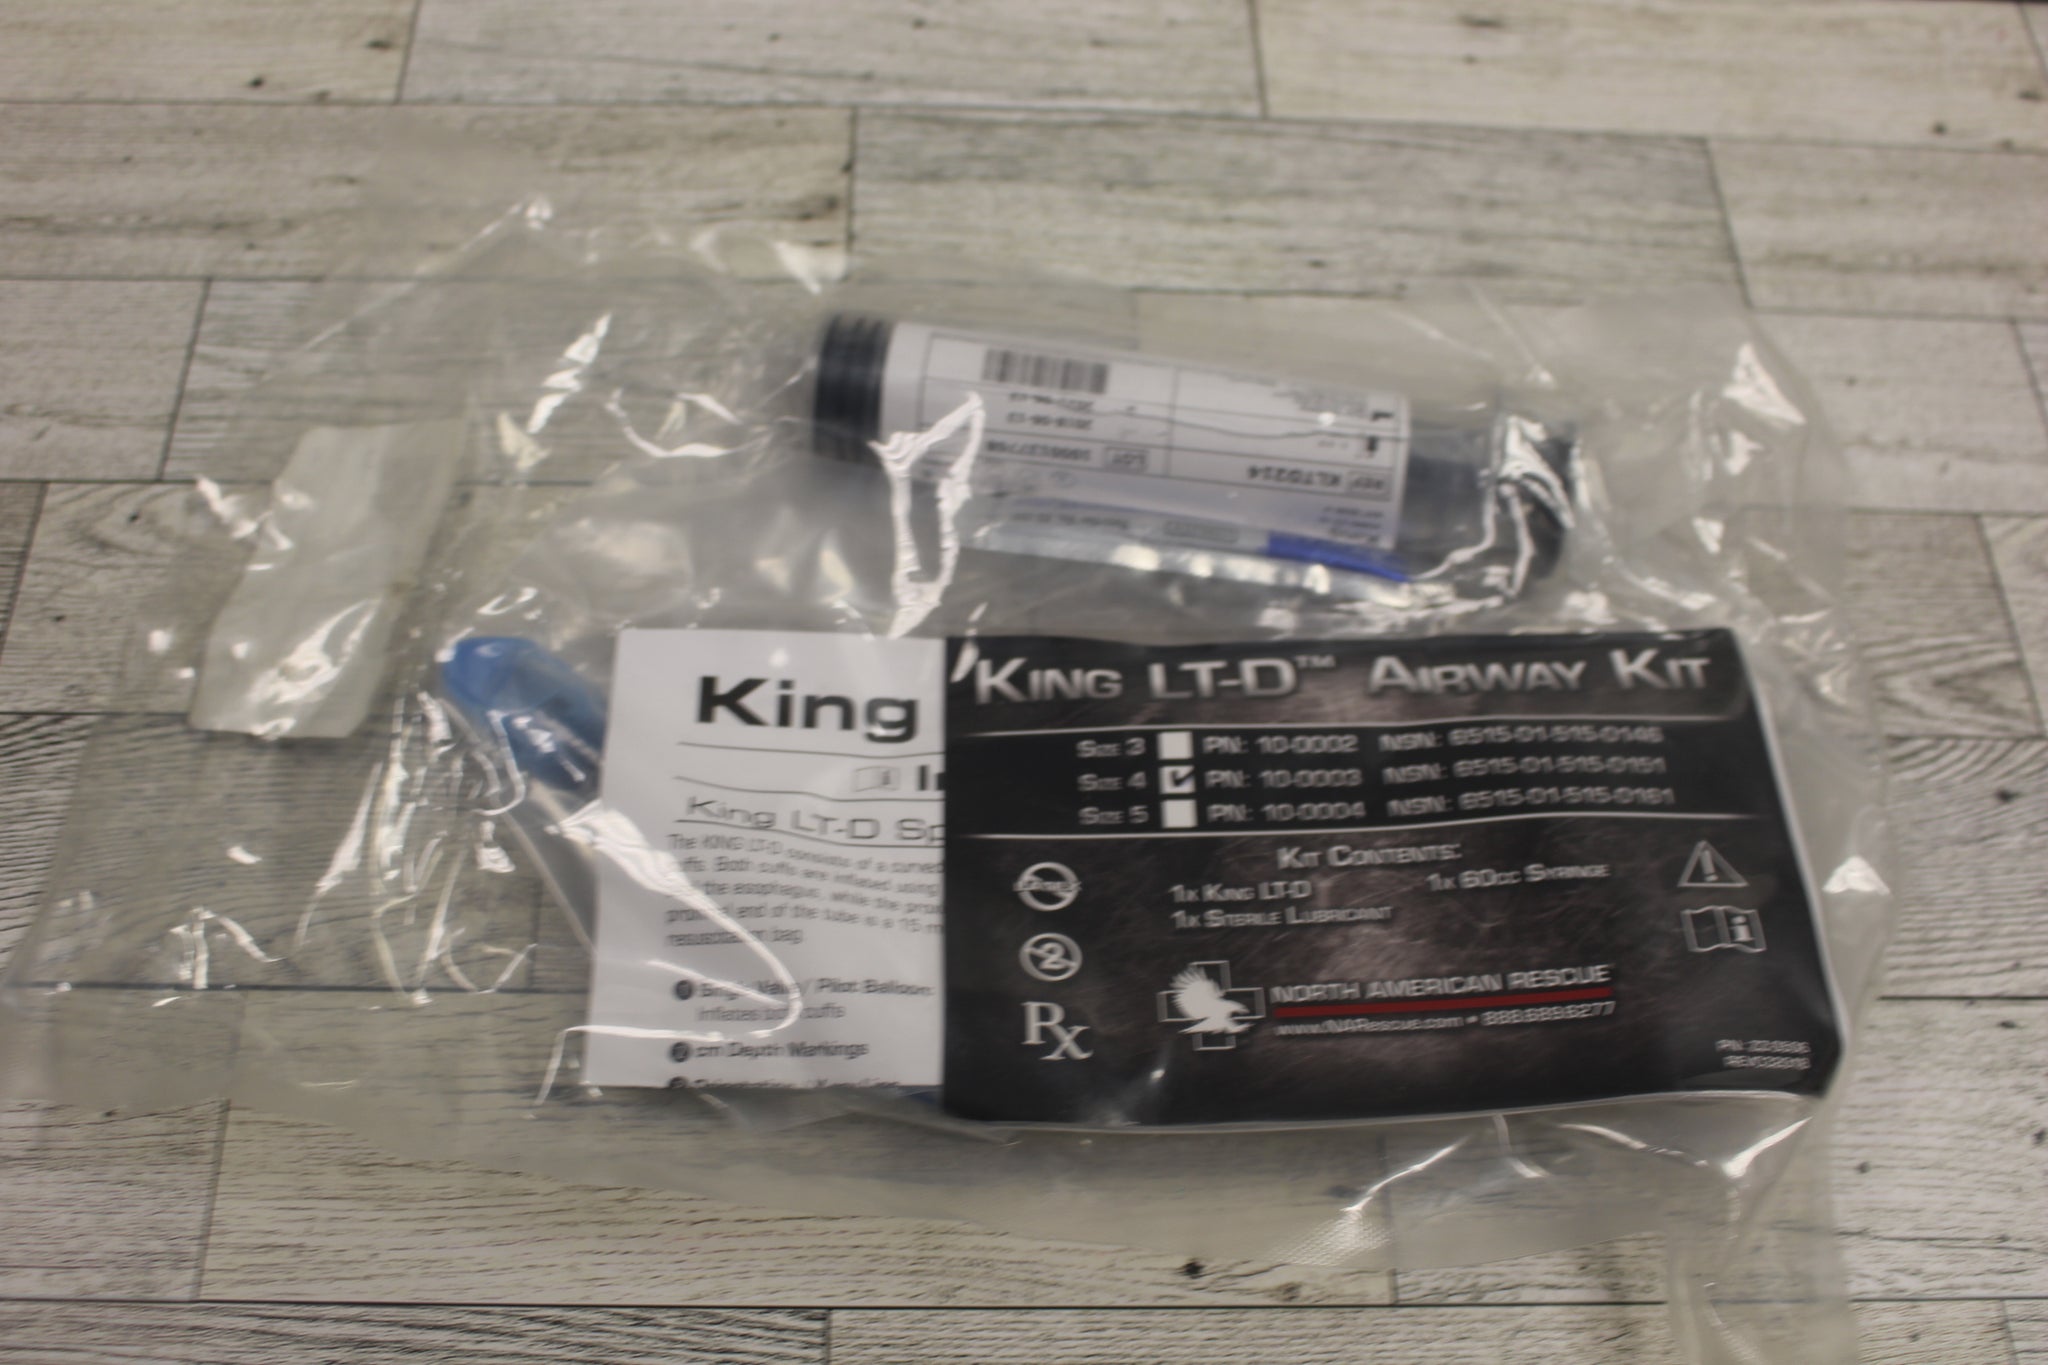 King LTS-D Airway Kit (Size 2,3,4, or 5)